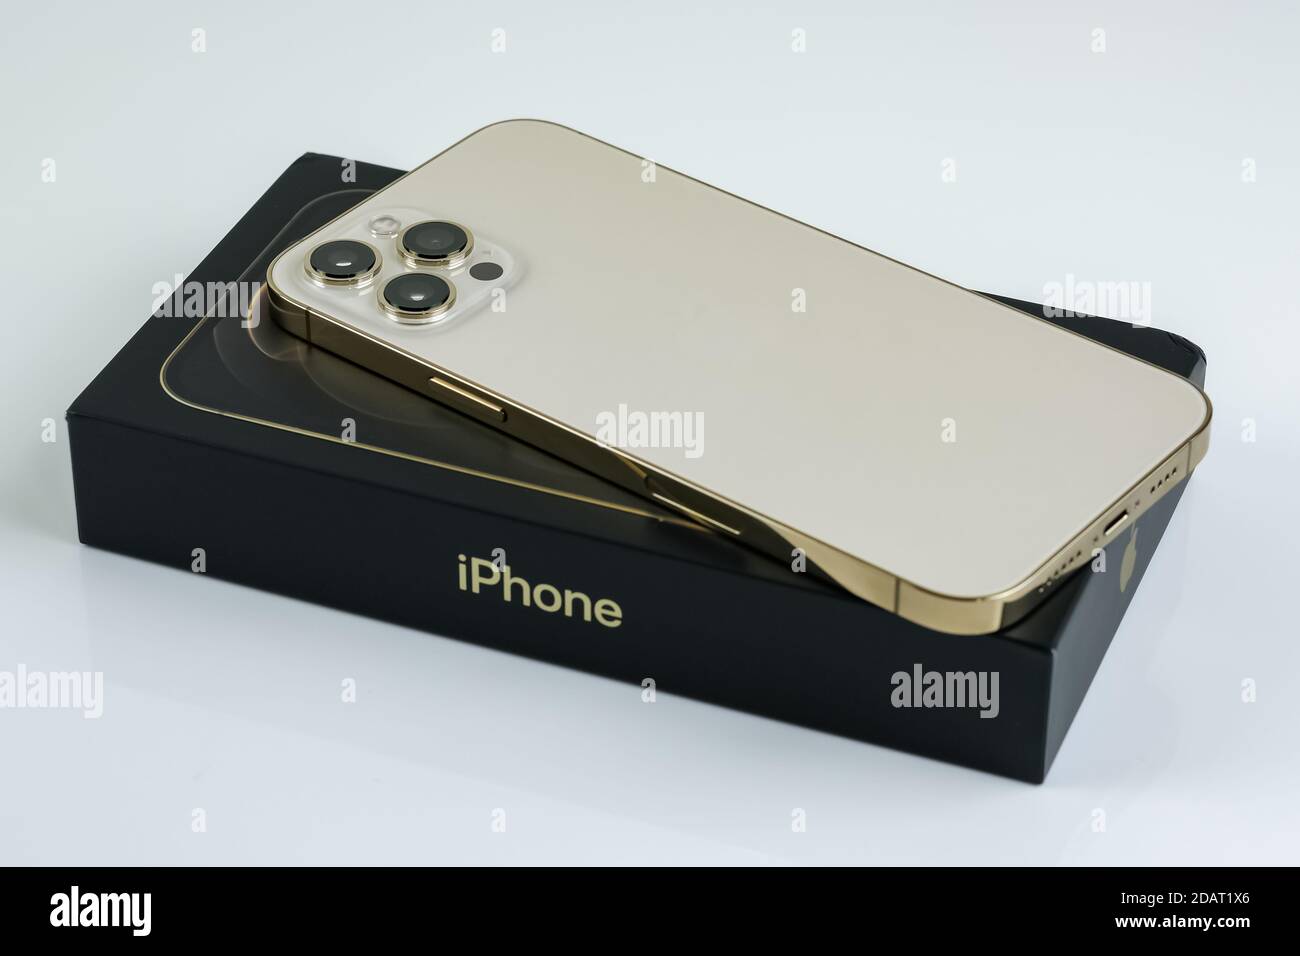 Iphone 12 Pro Max Box High Resolution Stock Photography and Images - Alamy